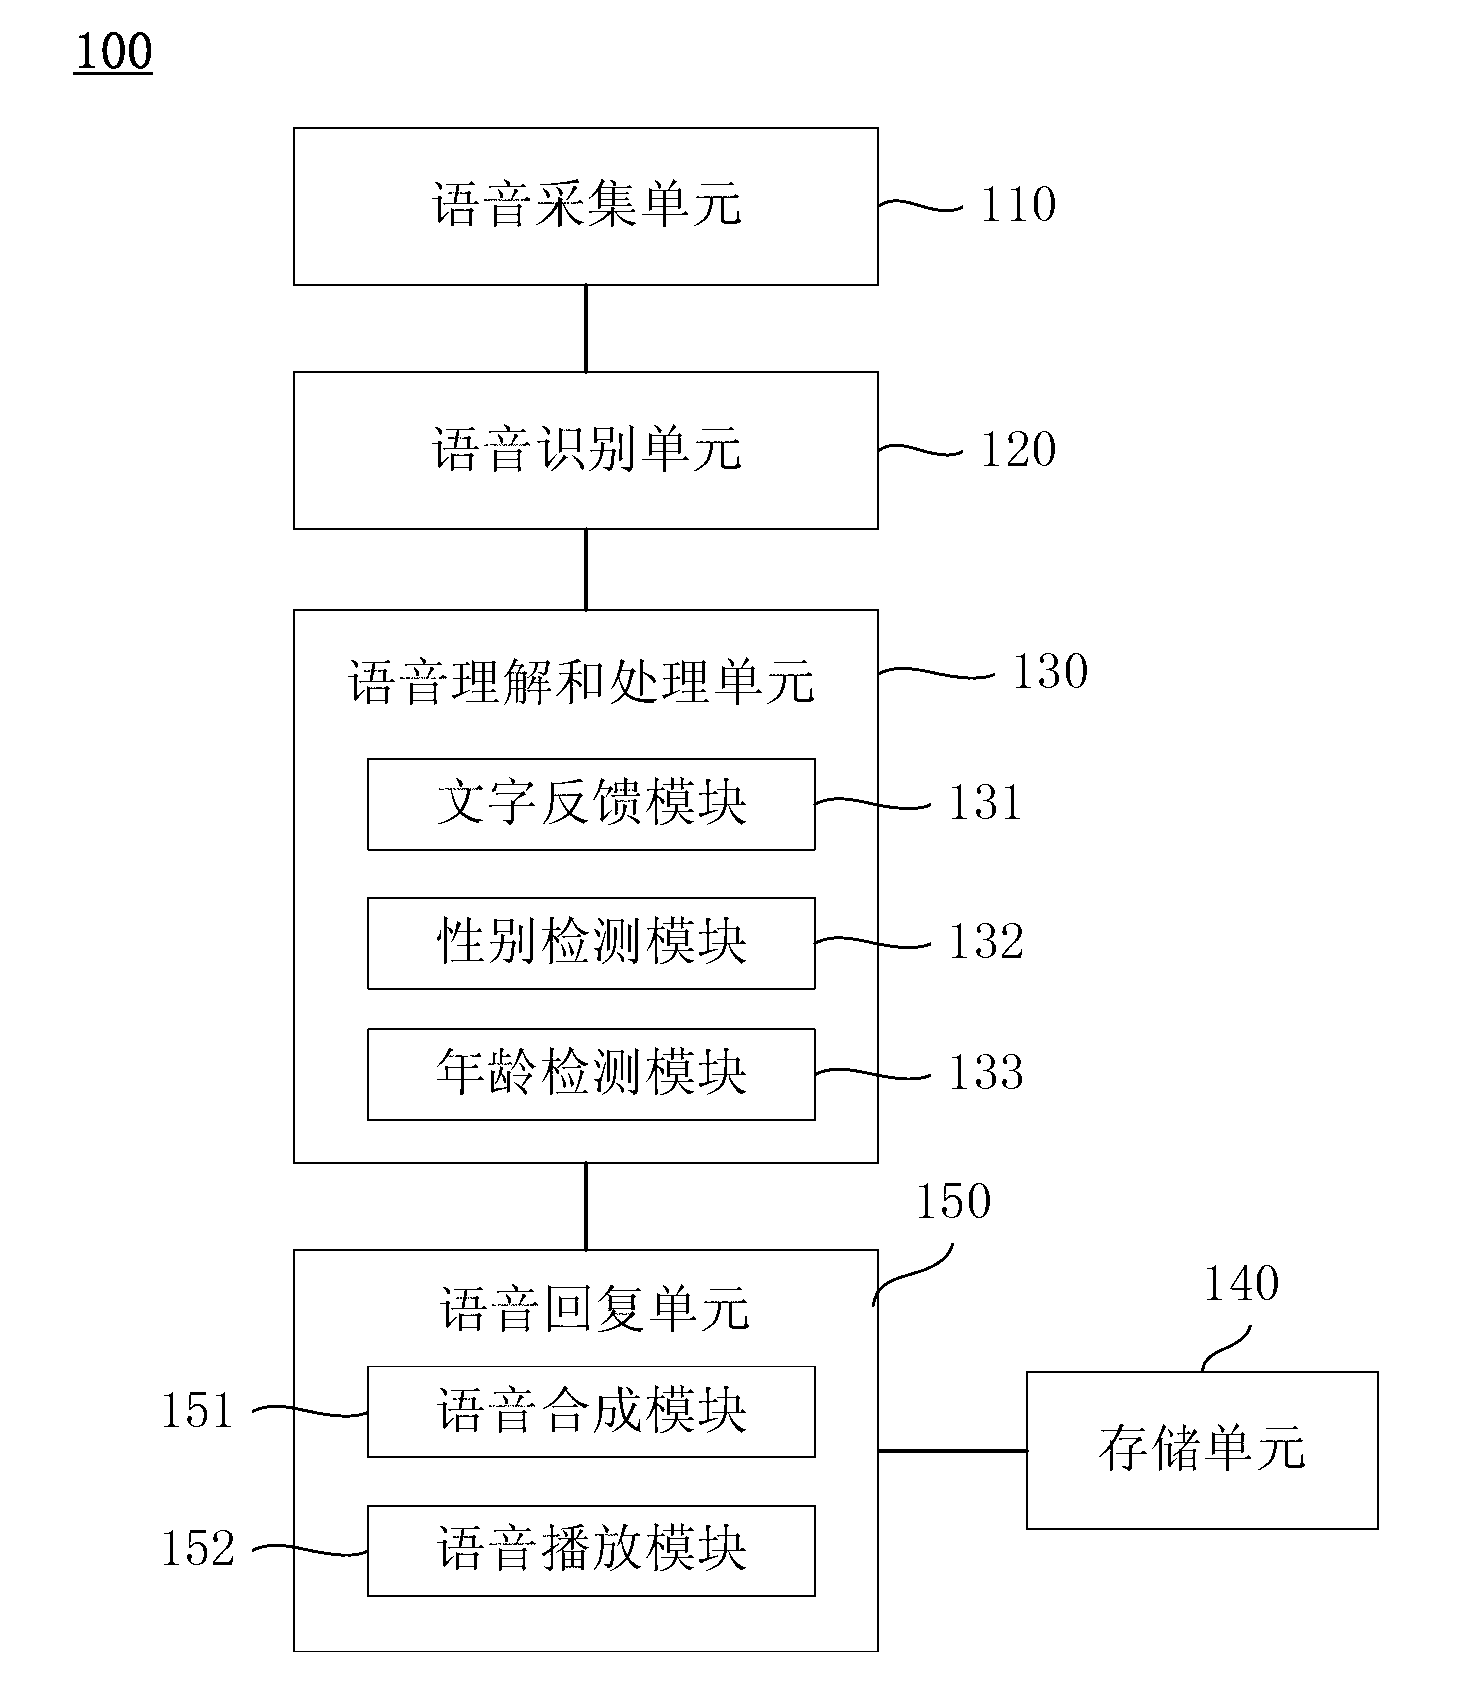 Voice recognition processing and feedback system, voice response method